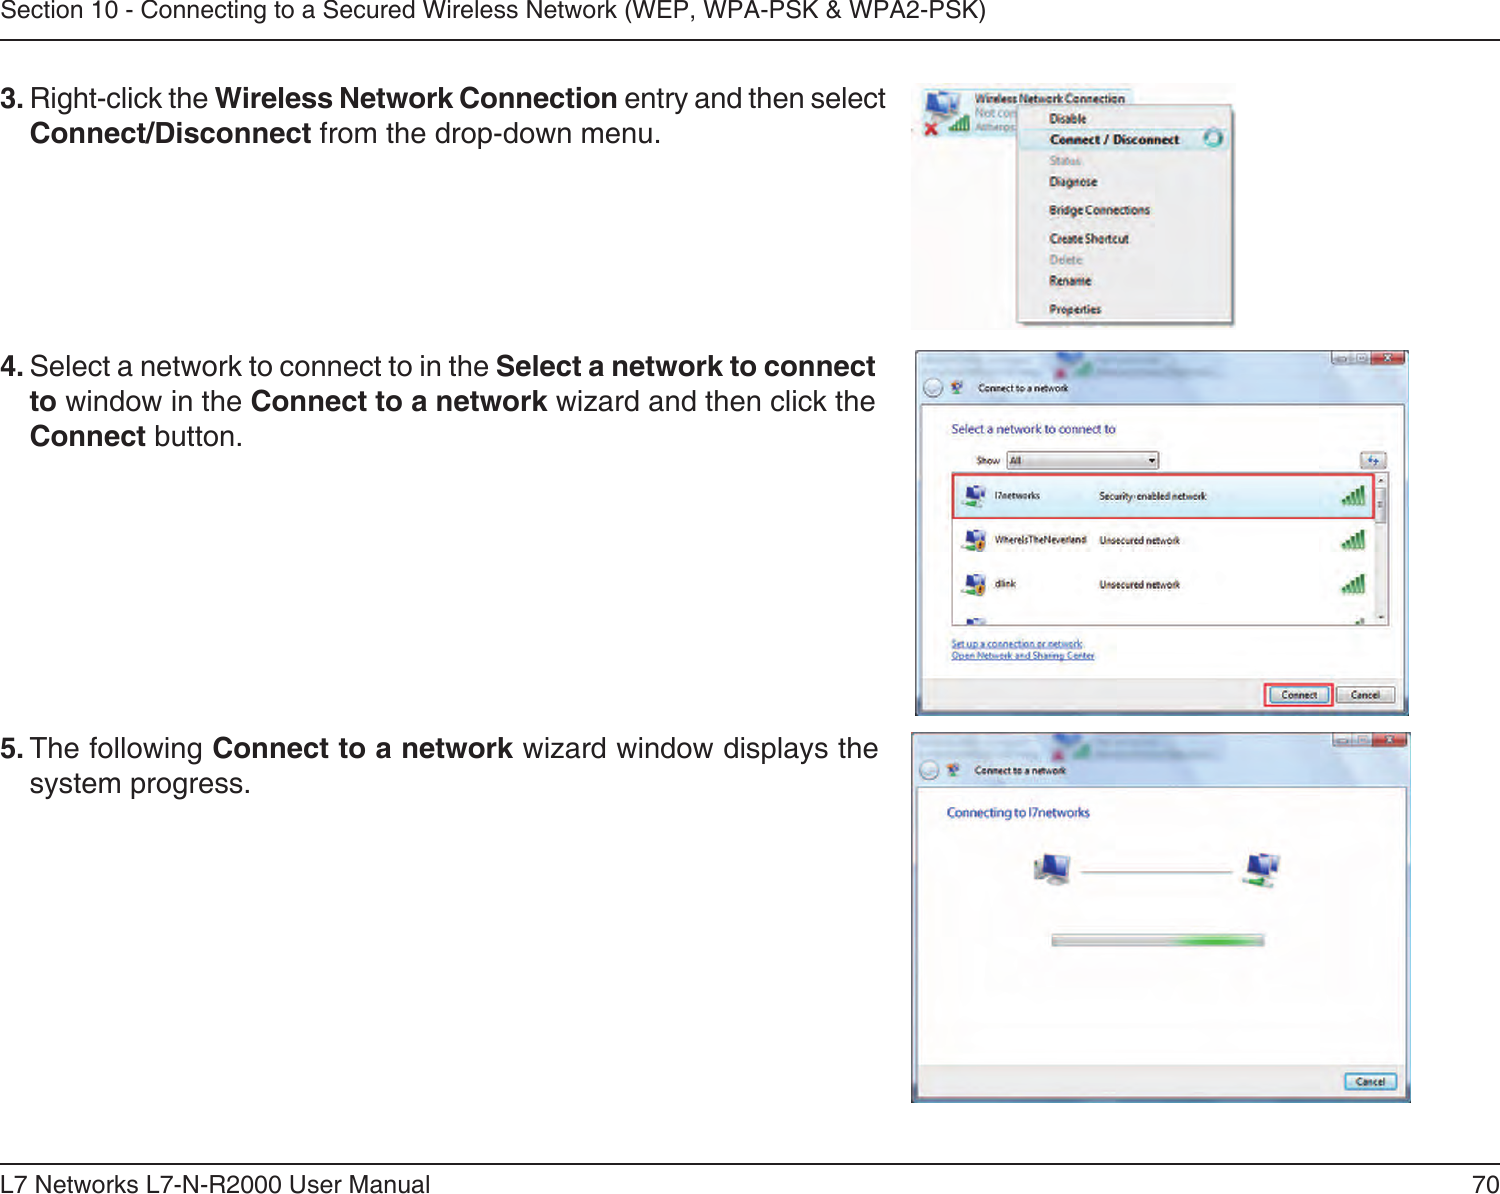 70L7 Networks L7-N-R2000 User ManualSection 10 - Connecting to a Secured Wireless Network (WEP, WPA-PSK &amp; WPA2-PSK)4. Select a network to connect to in the Select a network to connect to window in the Connect to a network wizard and then click the Connect button. 5. The following Connect to a network wizard window displays the system progress. 3. Right-click the Wireless Network Connection entry and then select Connect/Disconnect from the drop-down menu. 